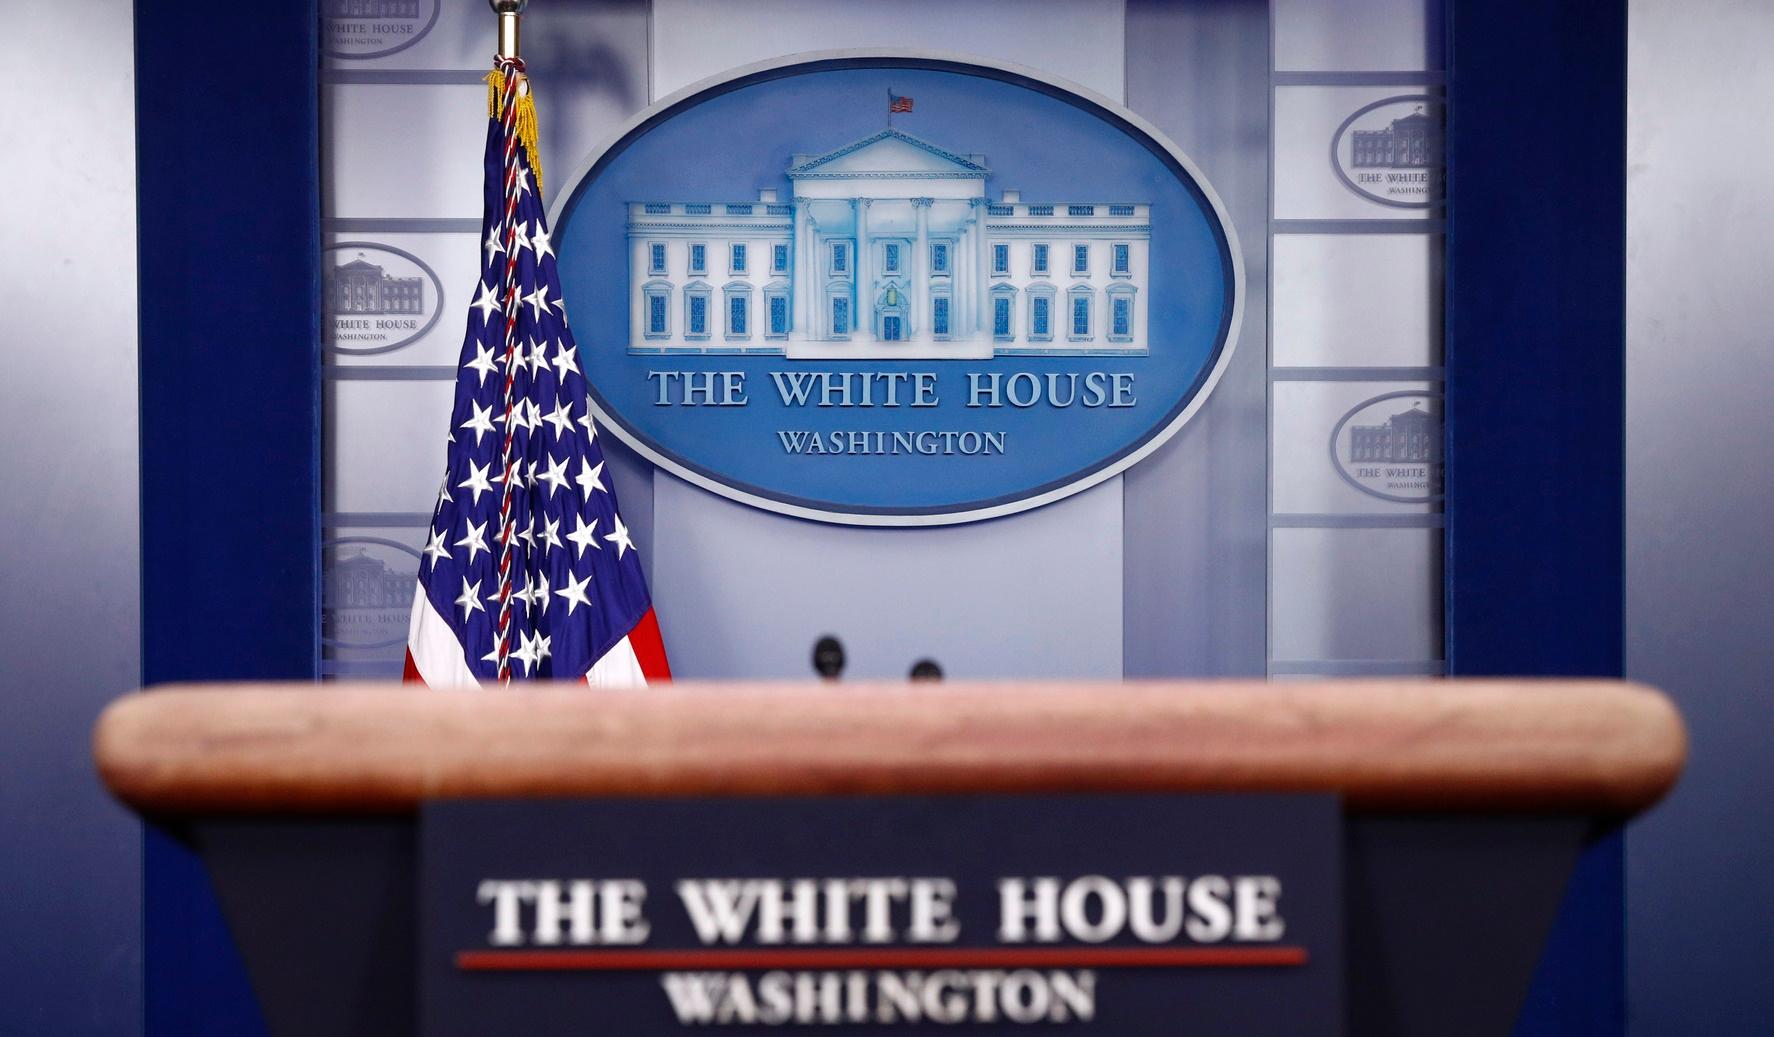 FILE - In this March 22, 2020, file photo a plaque depicting the White House is posted behind a podium in the James Brady Press Briefing Room of the White House in Washington. When Joe Biden takes the oath of office Wednesday, Jan. 20, 2021, he will begin to reshape the office of the presidency itself as he sets out to lead a bitterly divided nation grappling with a devastating pandemic and an insurrection meant to stop his ascension to power. (AP Photo/Patrick Semansky, File)